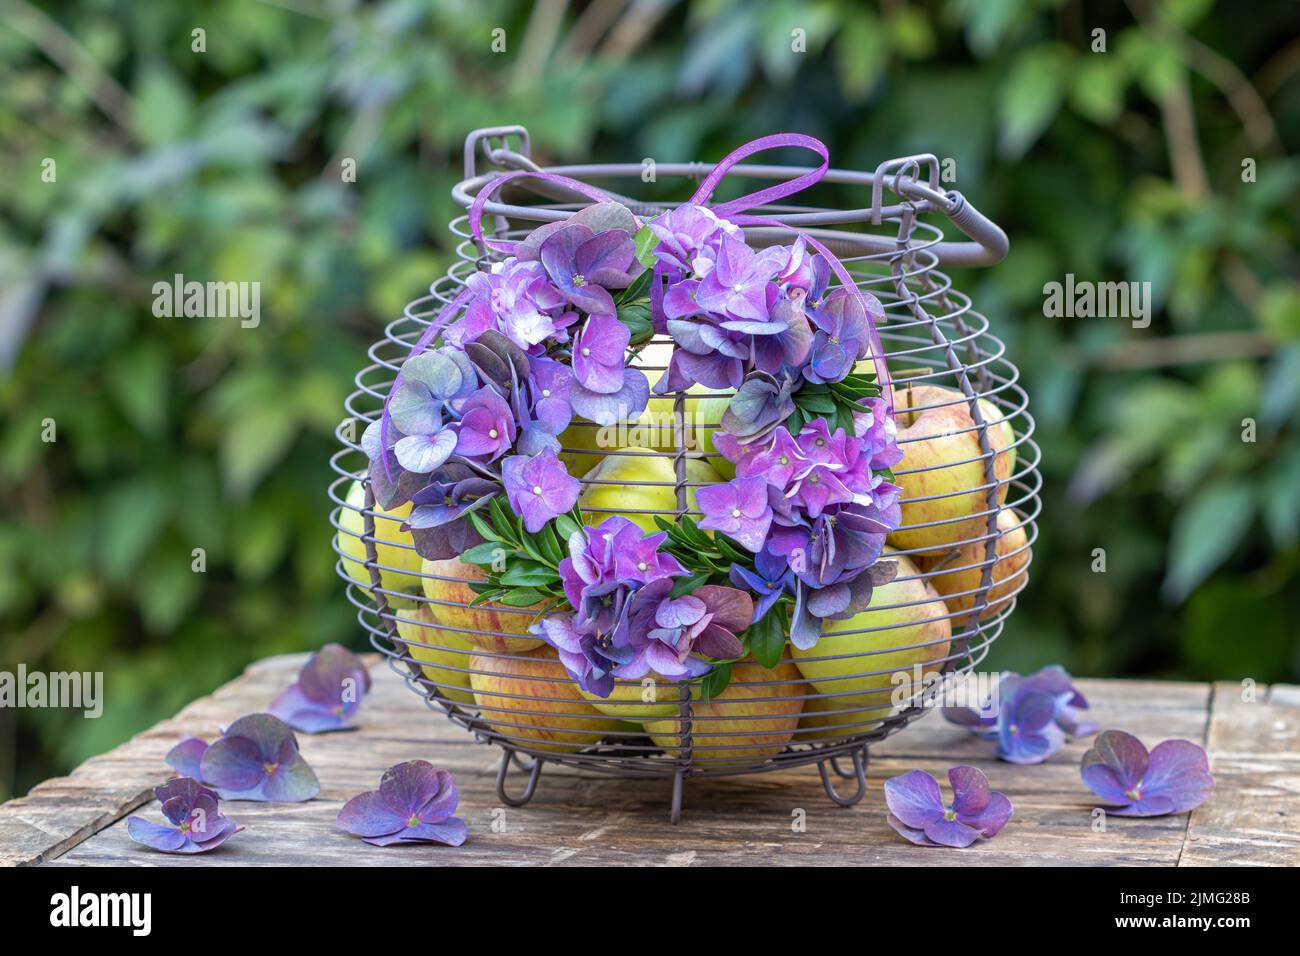 arrangement with wreath of purple hydrangea flowers and box tree and basket with apples Stock Photo